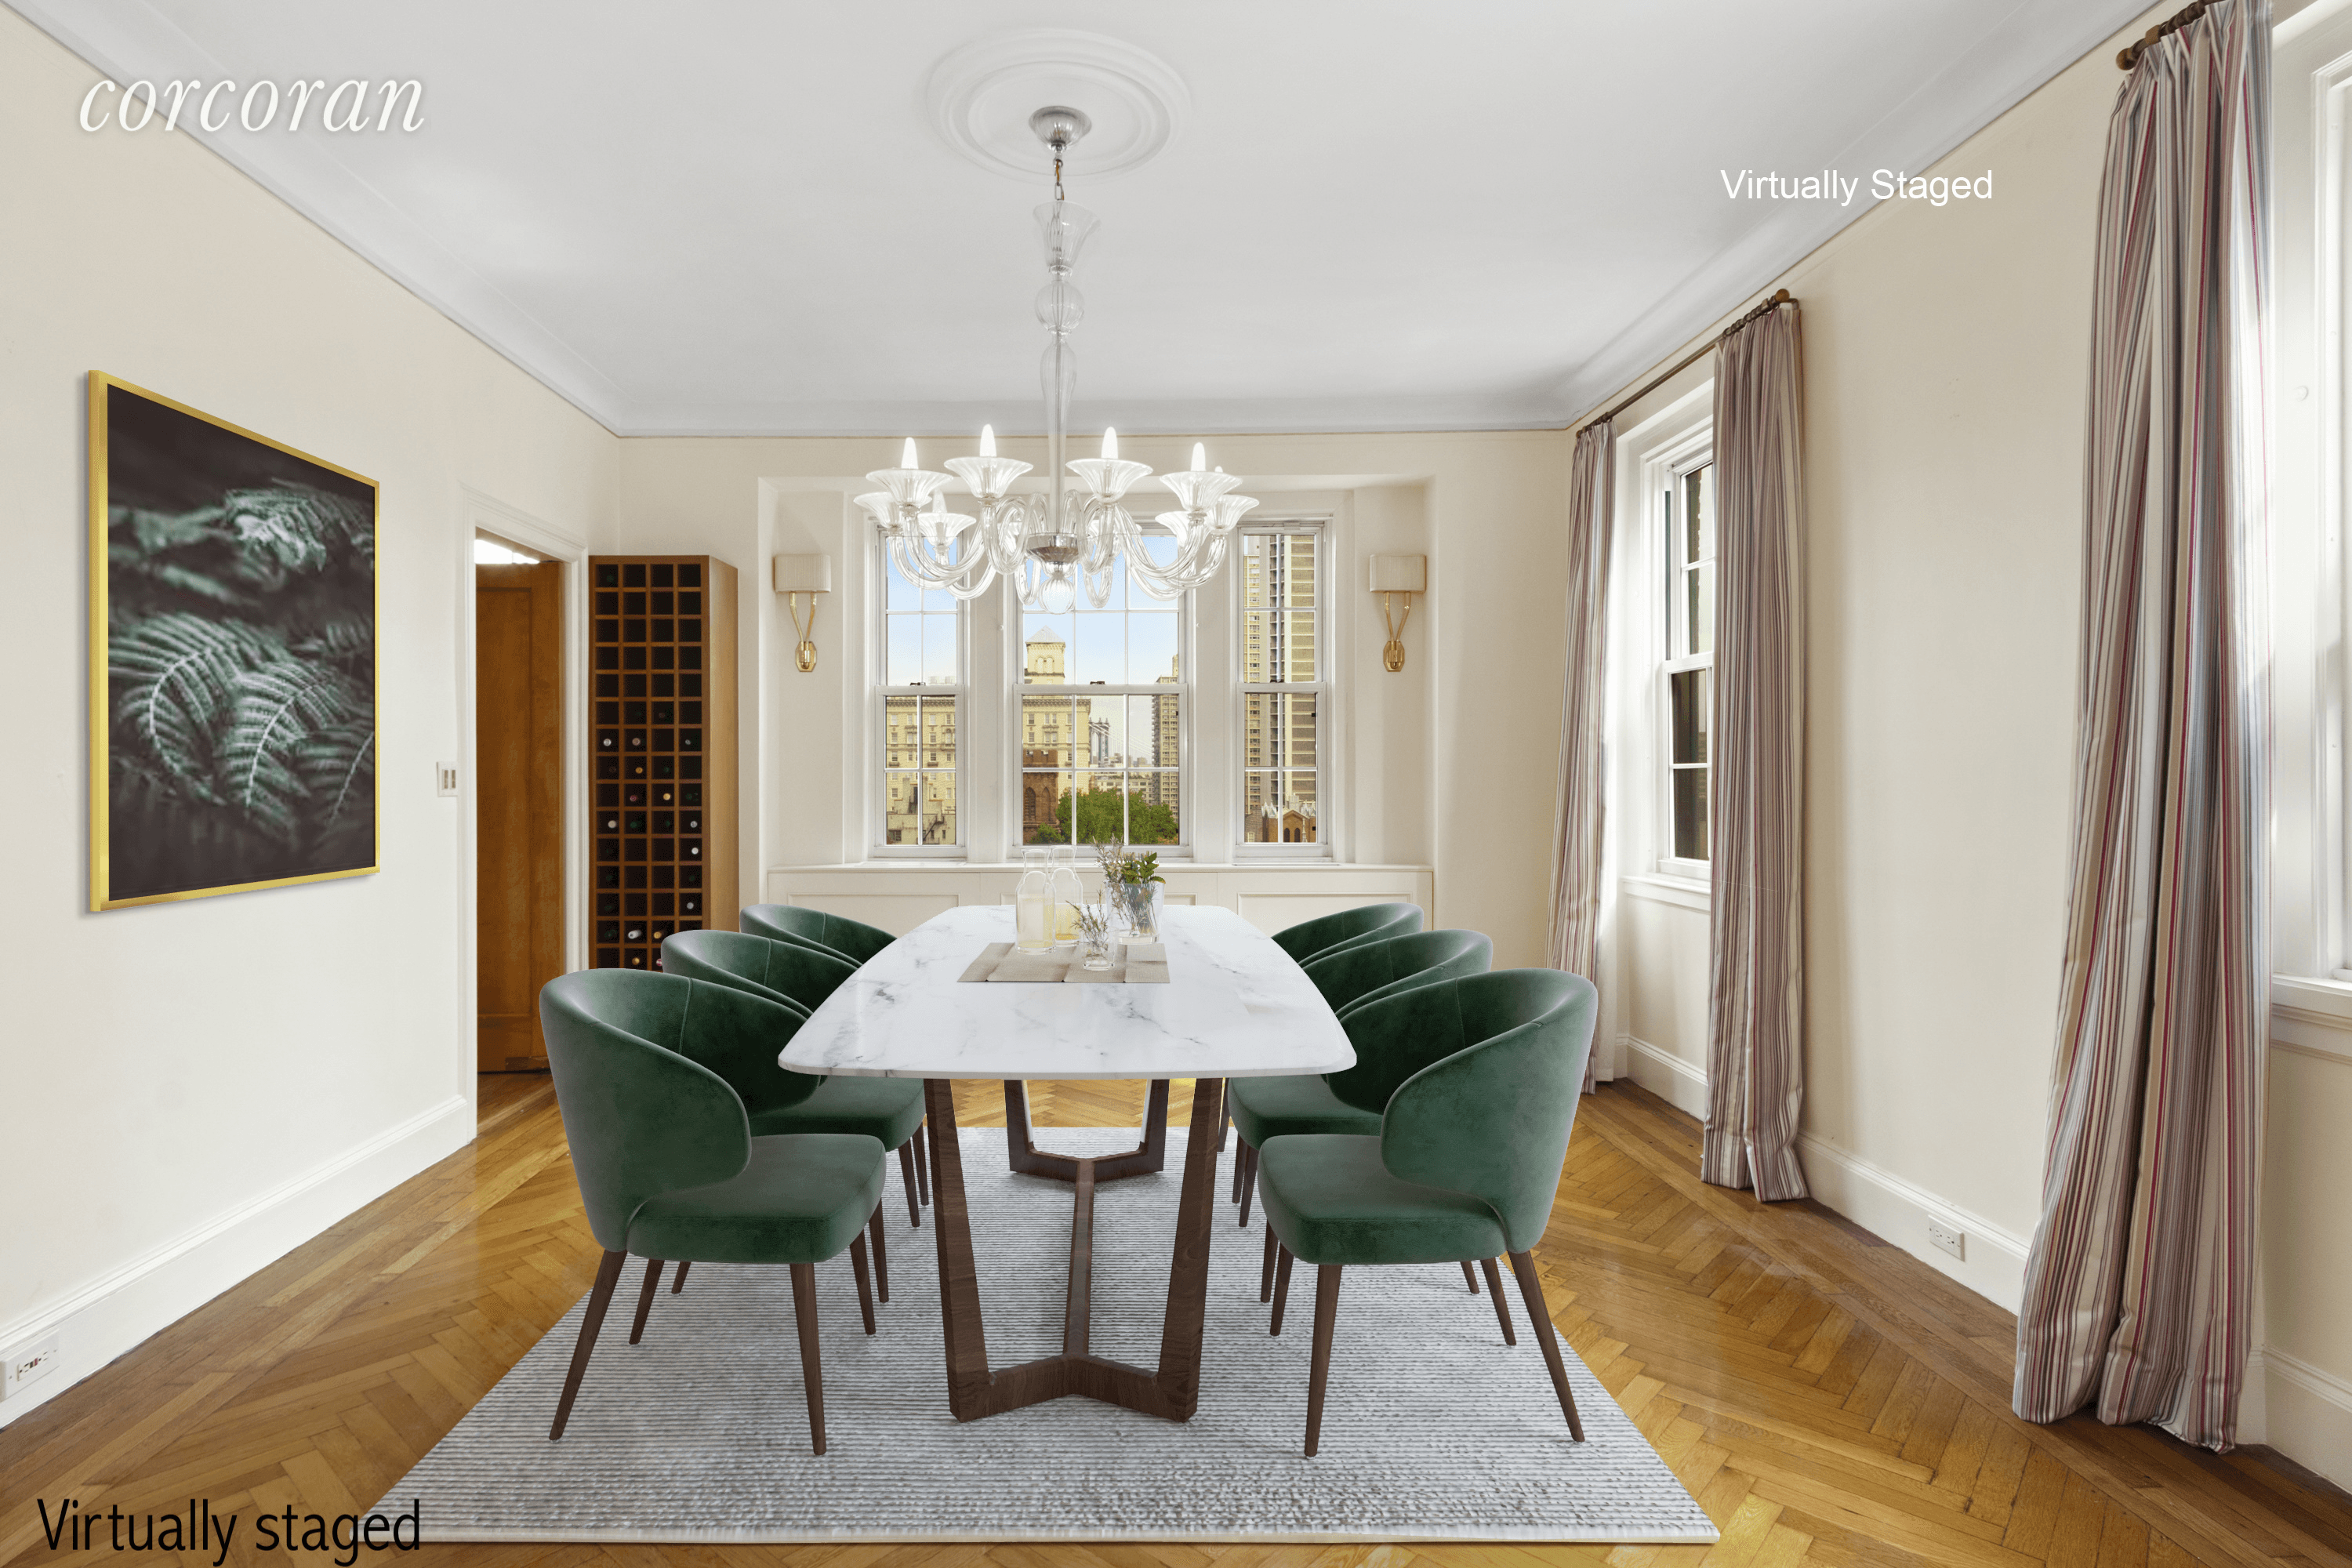 Apartment 9C at 160 Henry Street is a gracious and bright four bedroom home with three full baths in one of Brooklyn Heights finest prewar full service buildings.